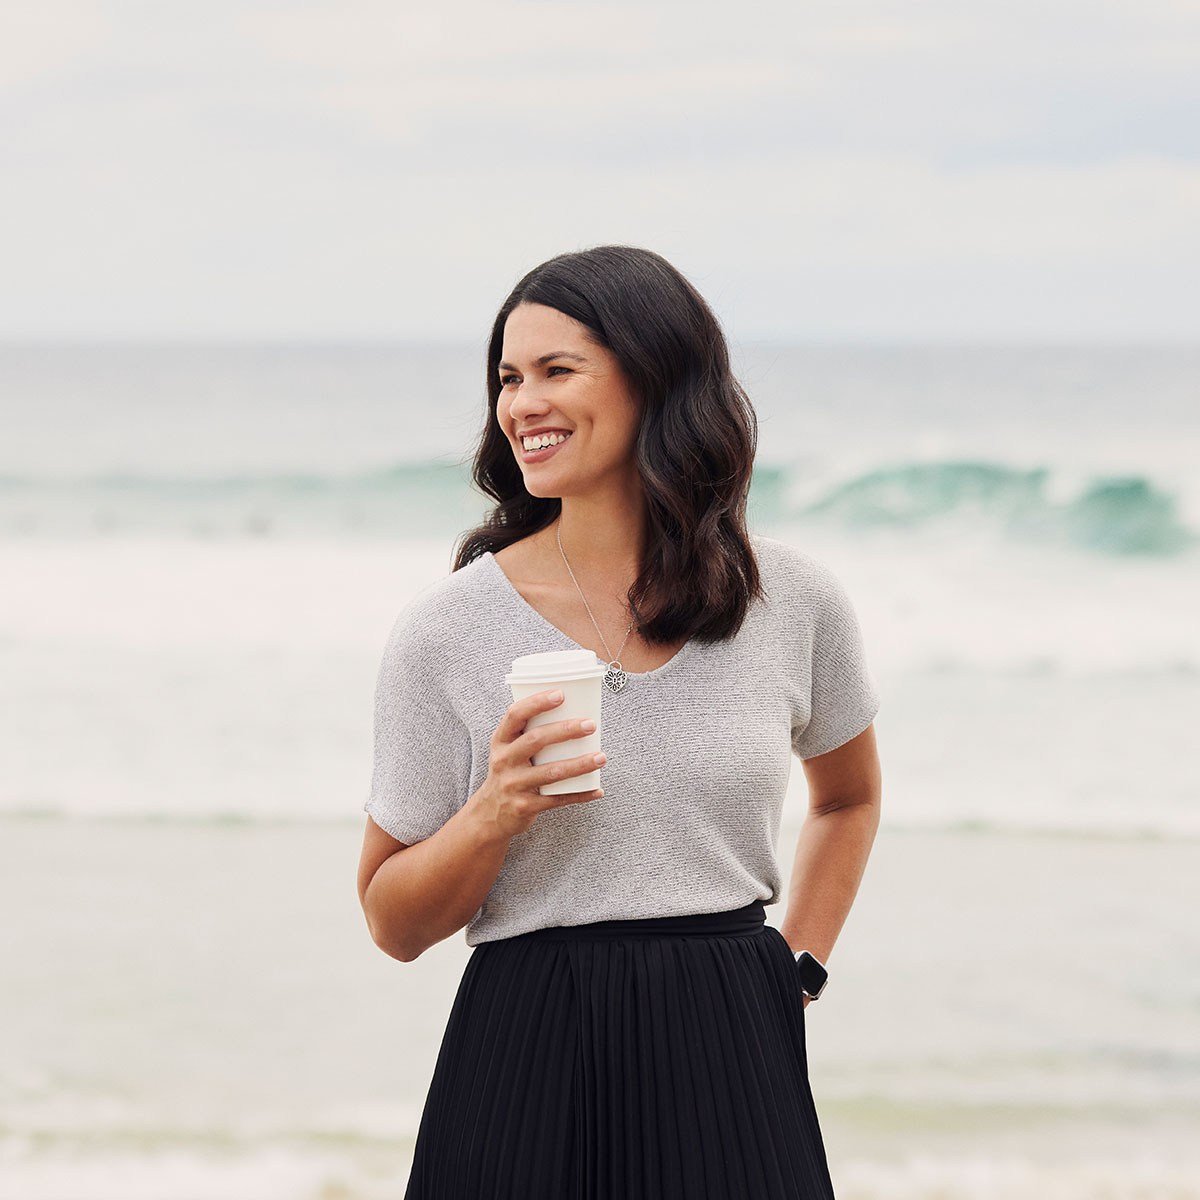 Lisa smiling on beach with coffee in hand